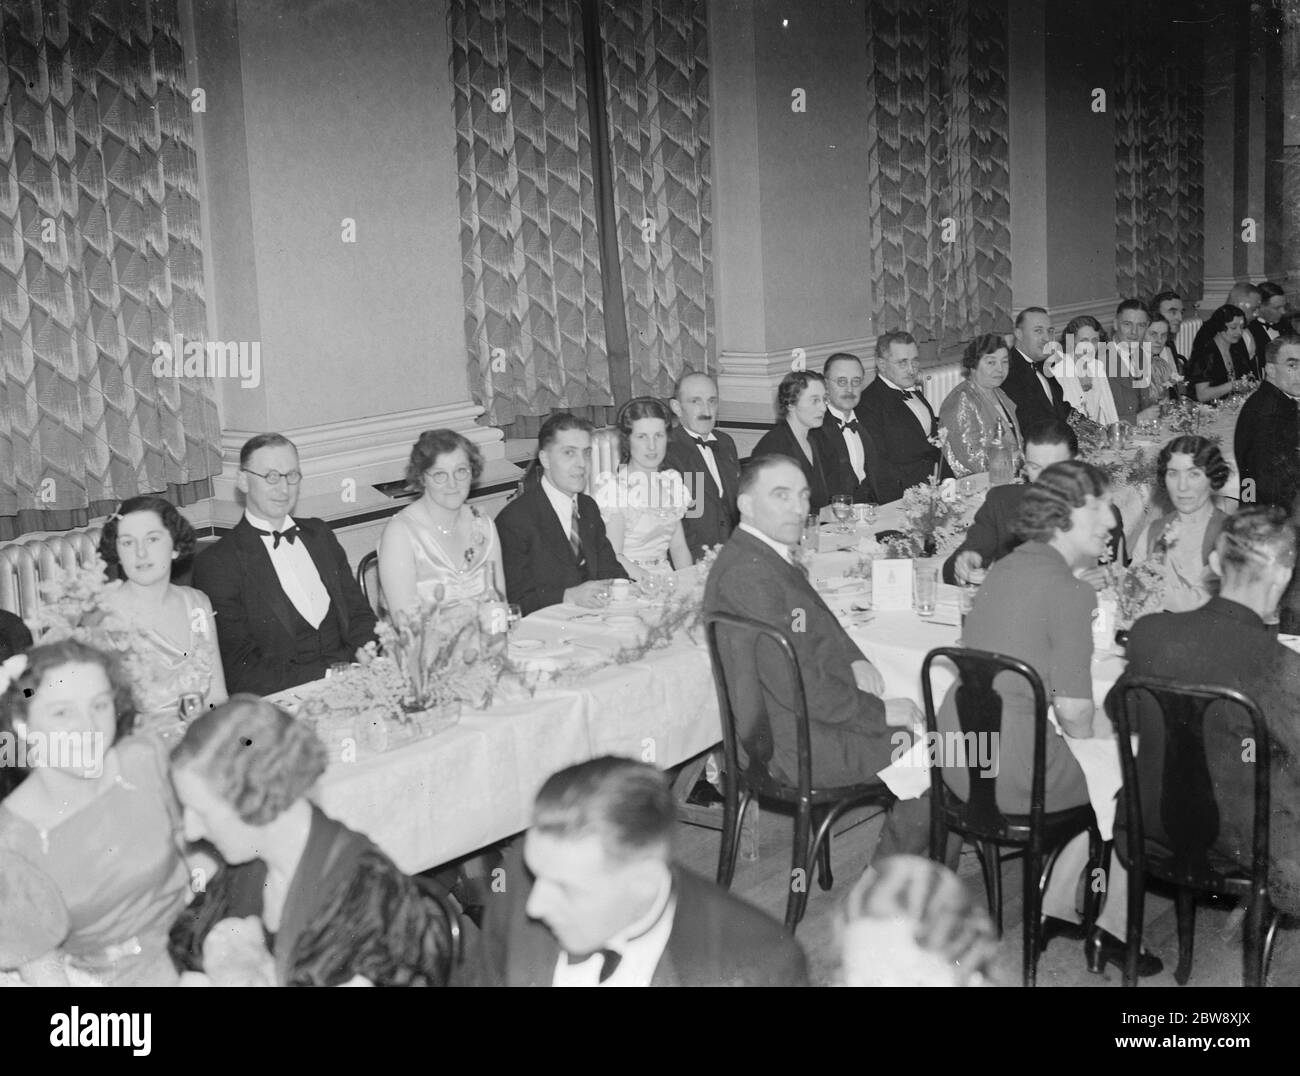 Das Royal Arsenal A I Department Dinner in Woolwich, London. 1939 Stockfoto